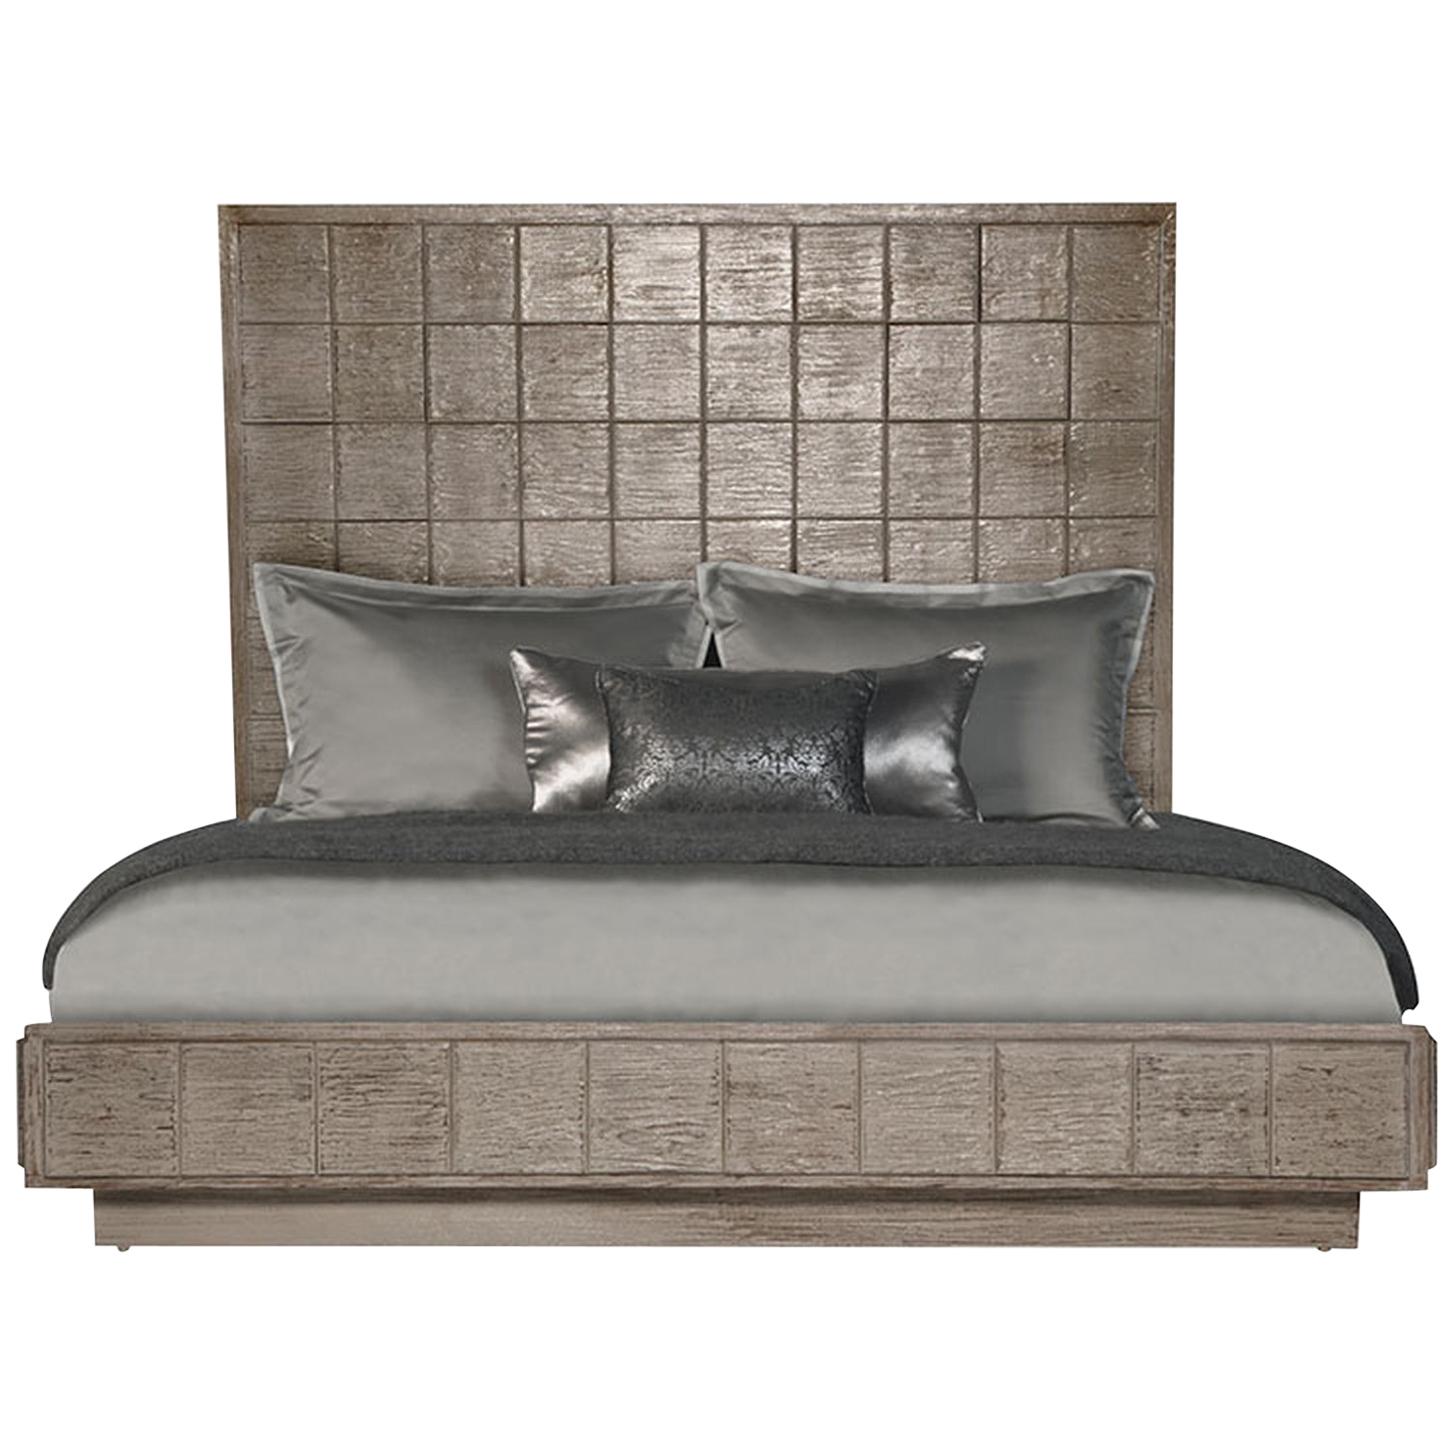 Mulholland King Bed in Lacquered Fog Gray by Innova Luxuxy Group For Sale